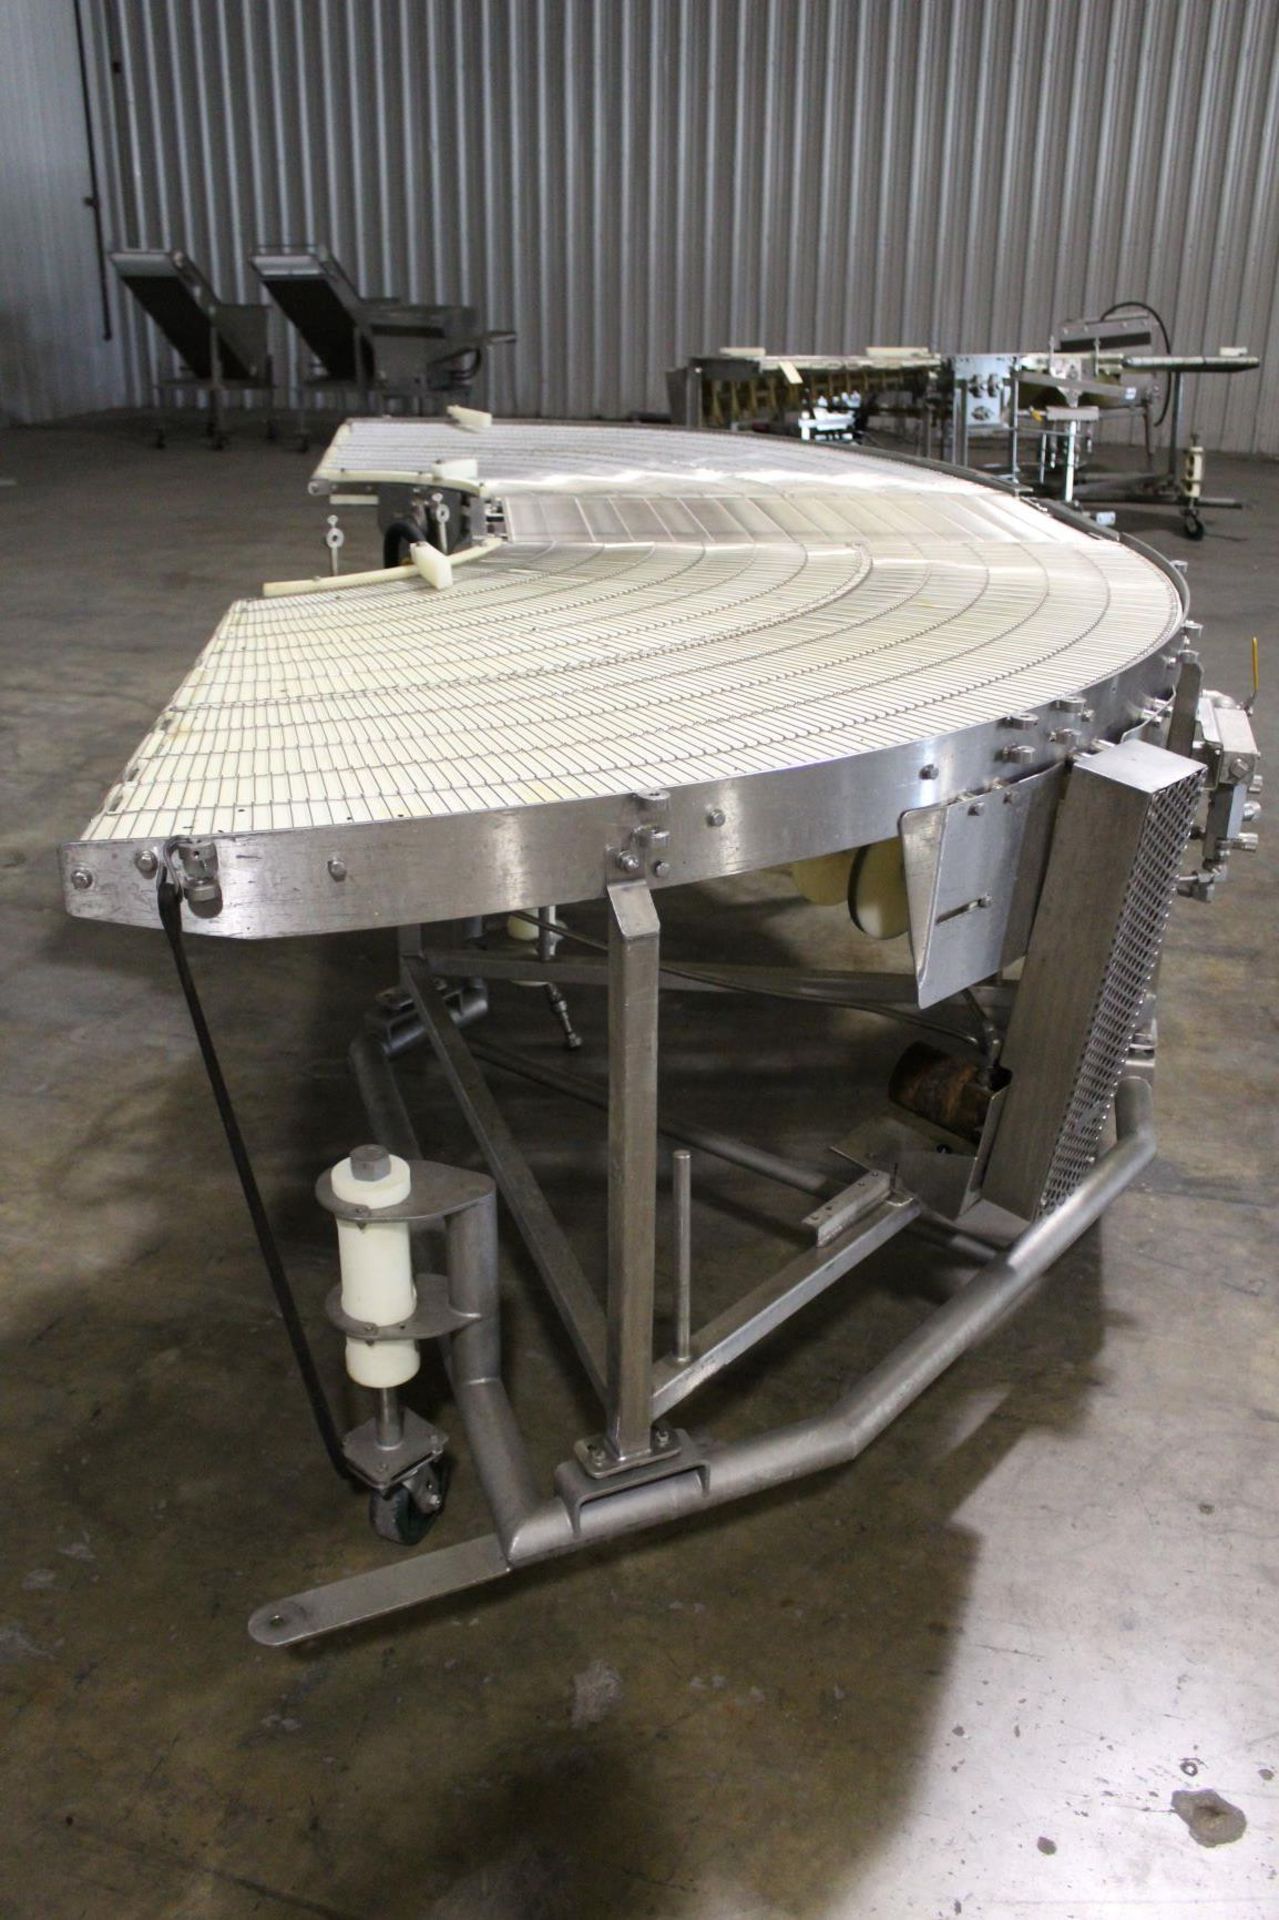 42" 180 Conveyor System, Item# mtl42180consys-2, Located in: Gainsville, GA - Image 2 of 7